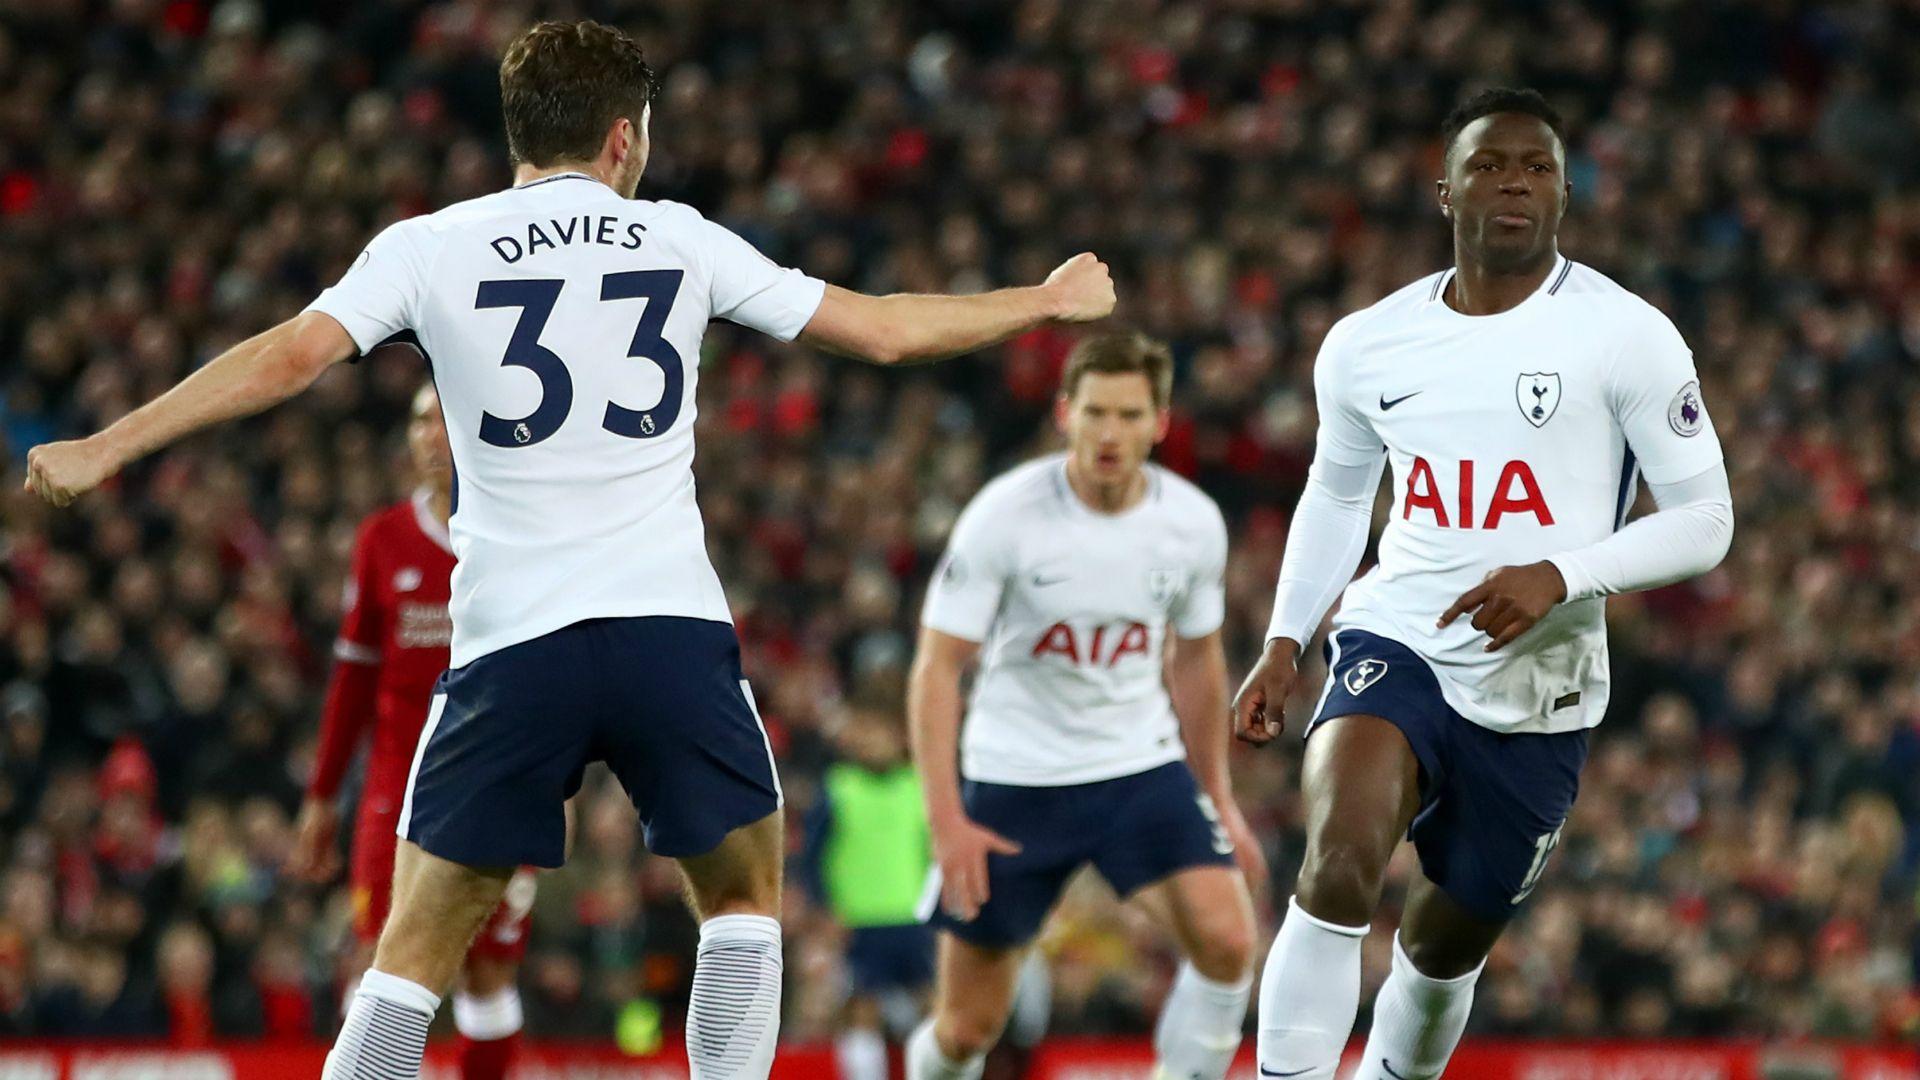 Tottenham's Victor Wanyama gutted by Liverpool stalemate. Soccer